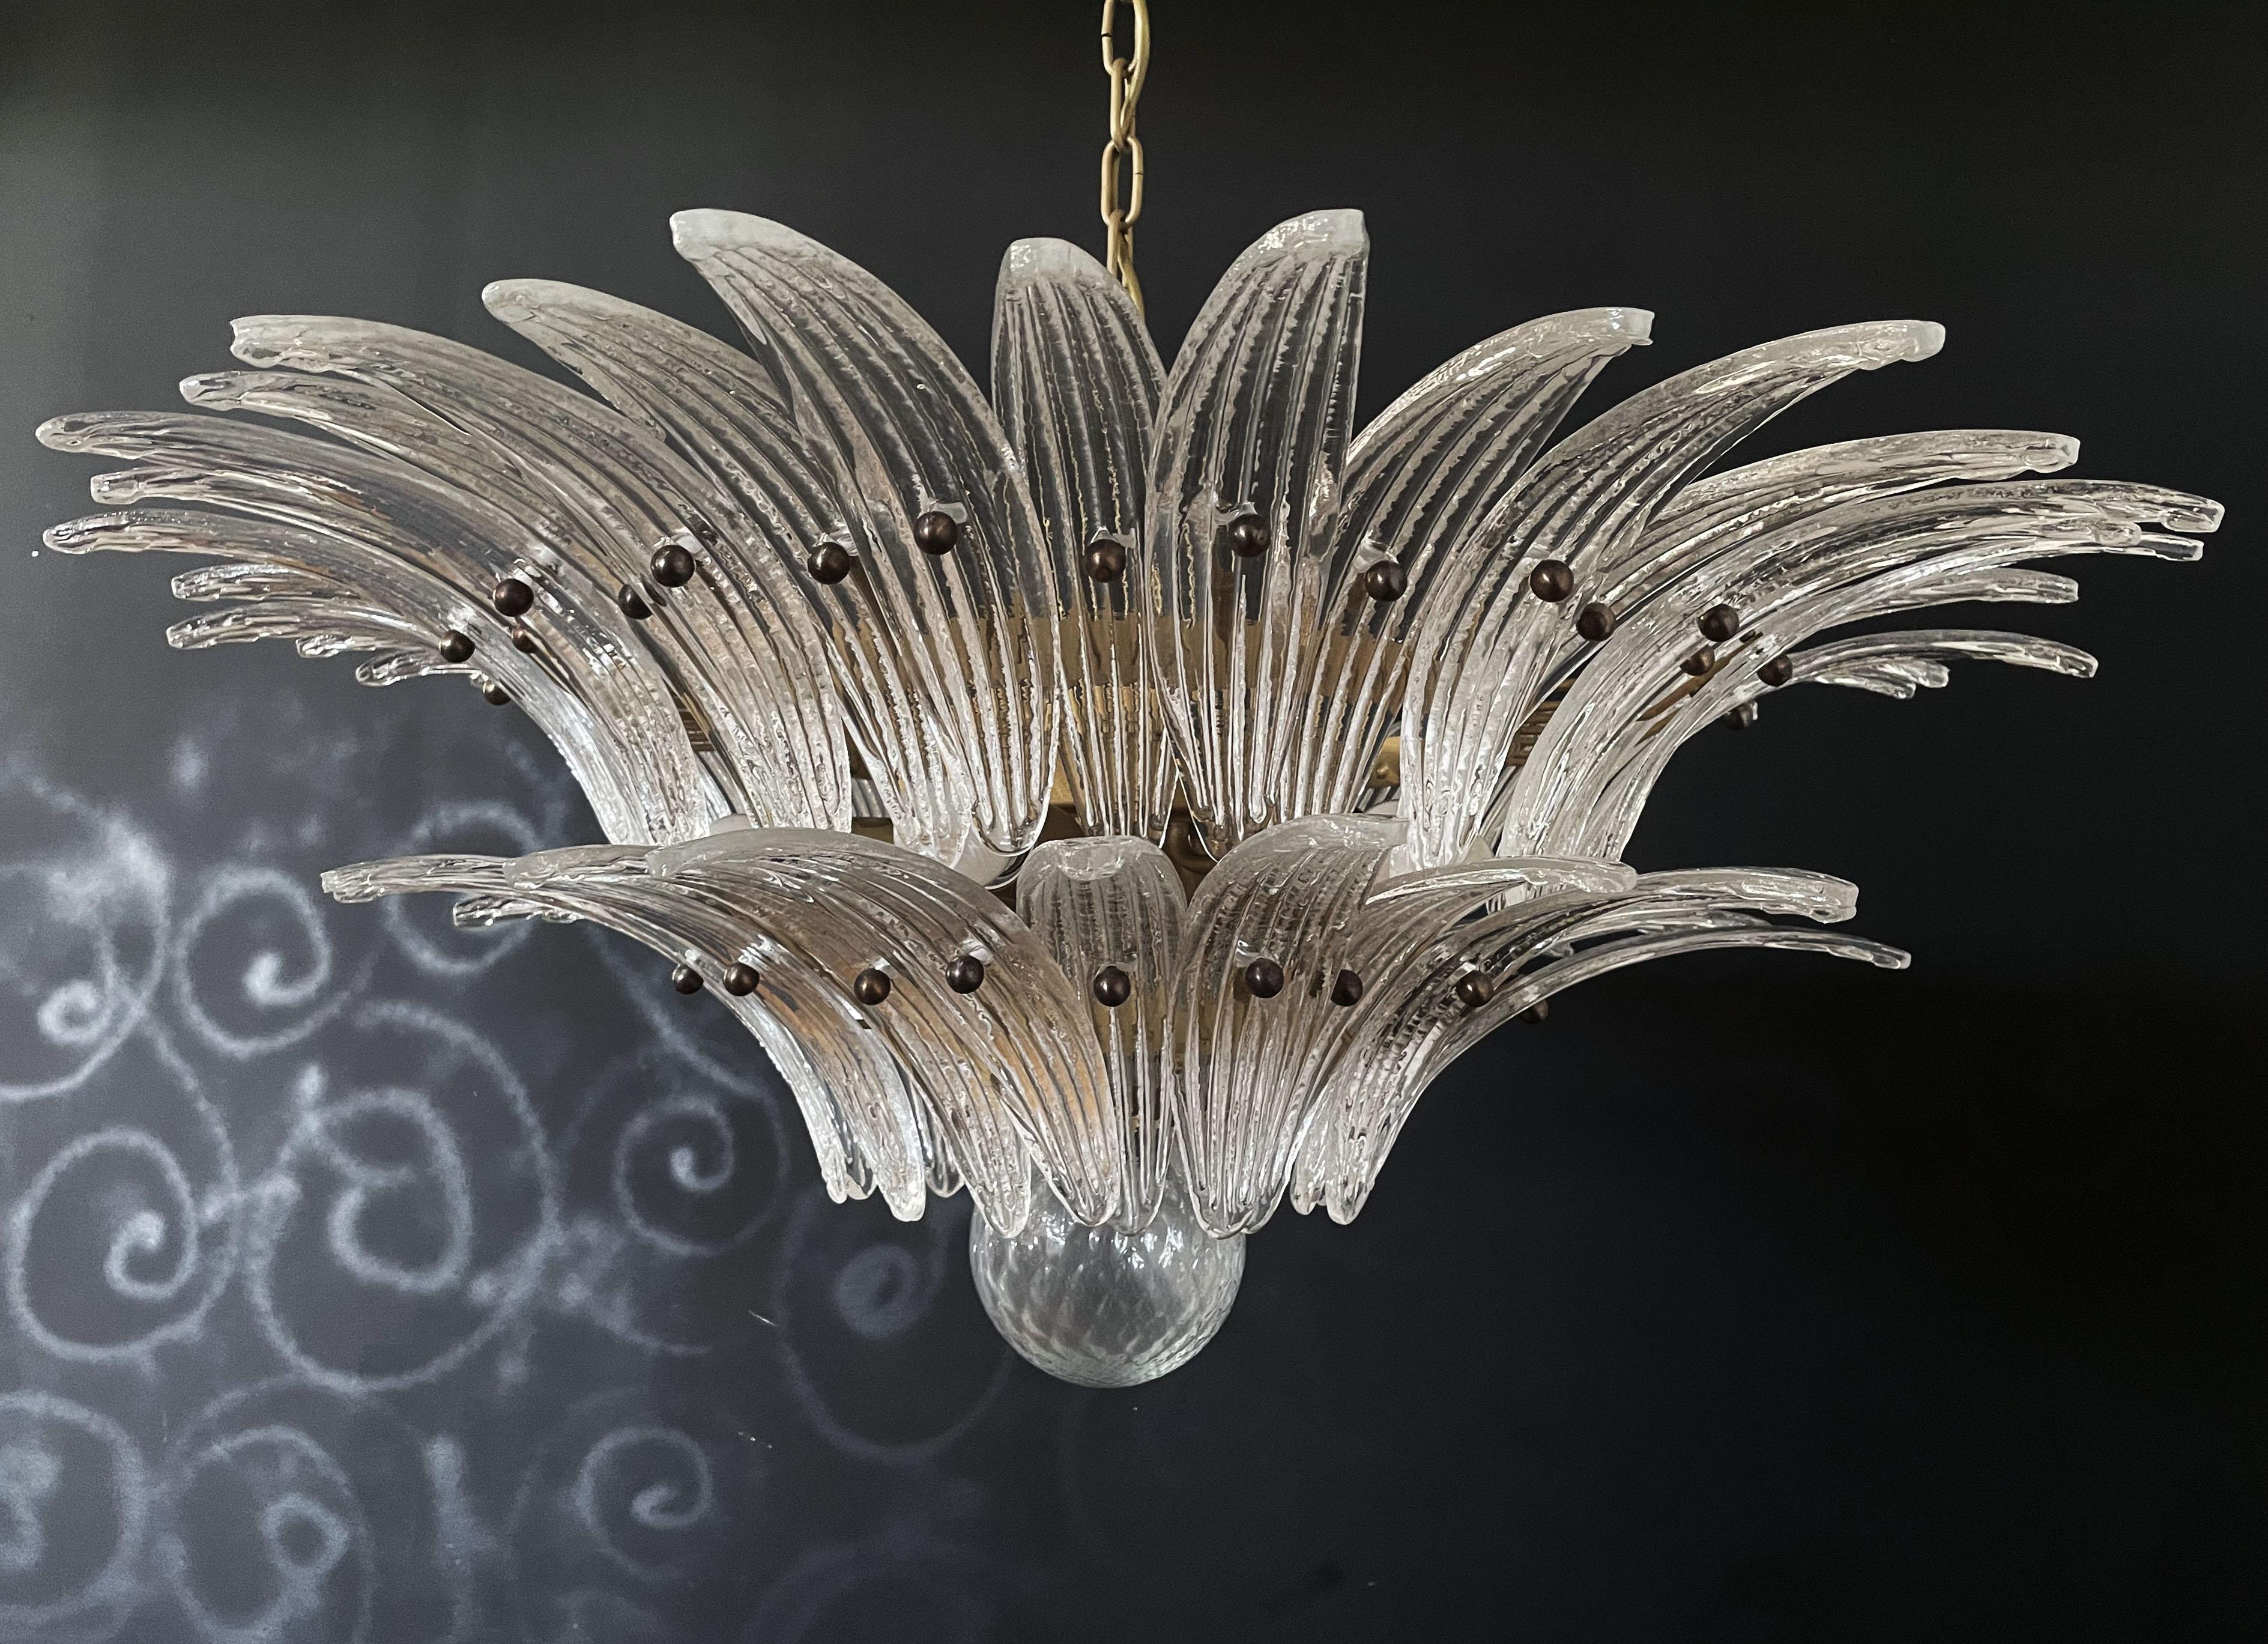 Luxury and GENUINE Murano Glass chandelier. HAND MADE IN MURANO. It made by 58 Murano crystal glasses in a gold metal frame.  The chandelier has also a Murano glass ball in the end of the lamp. Murano blown glass in a traditional way.
Period: late